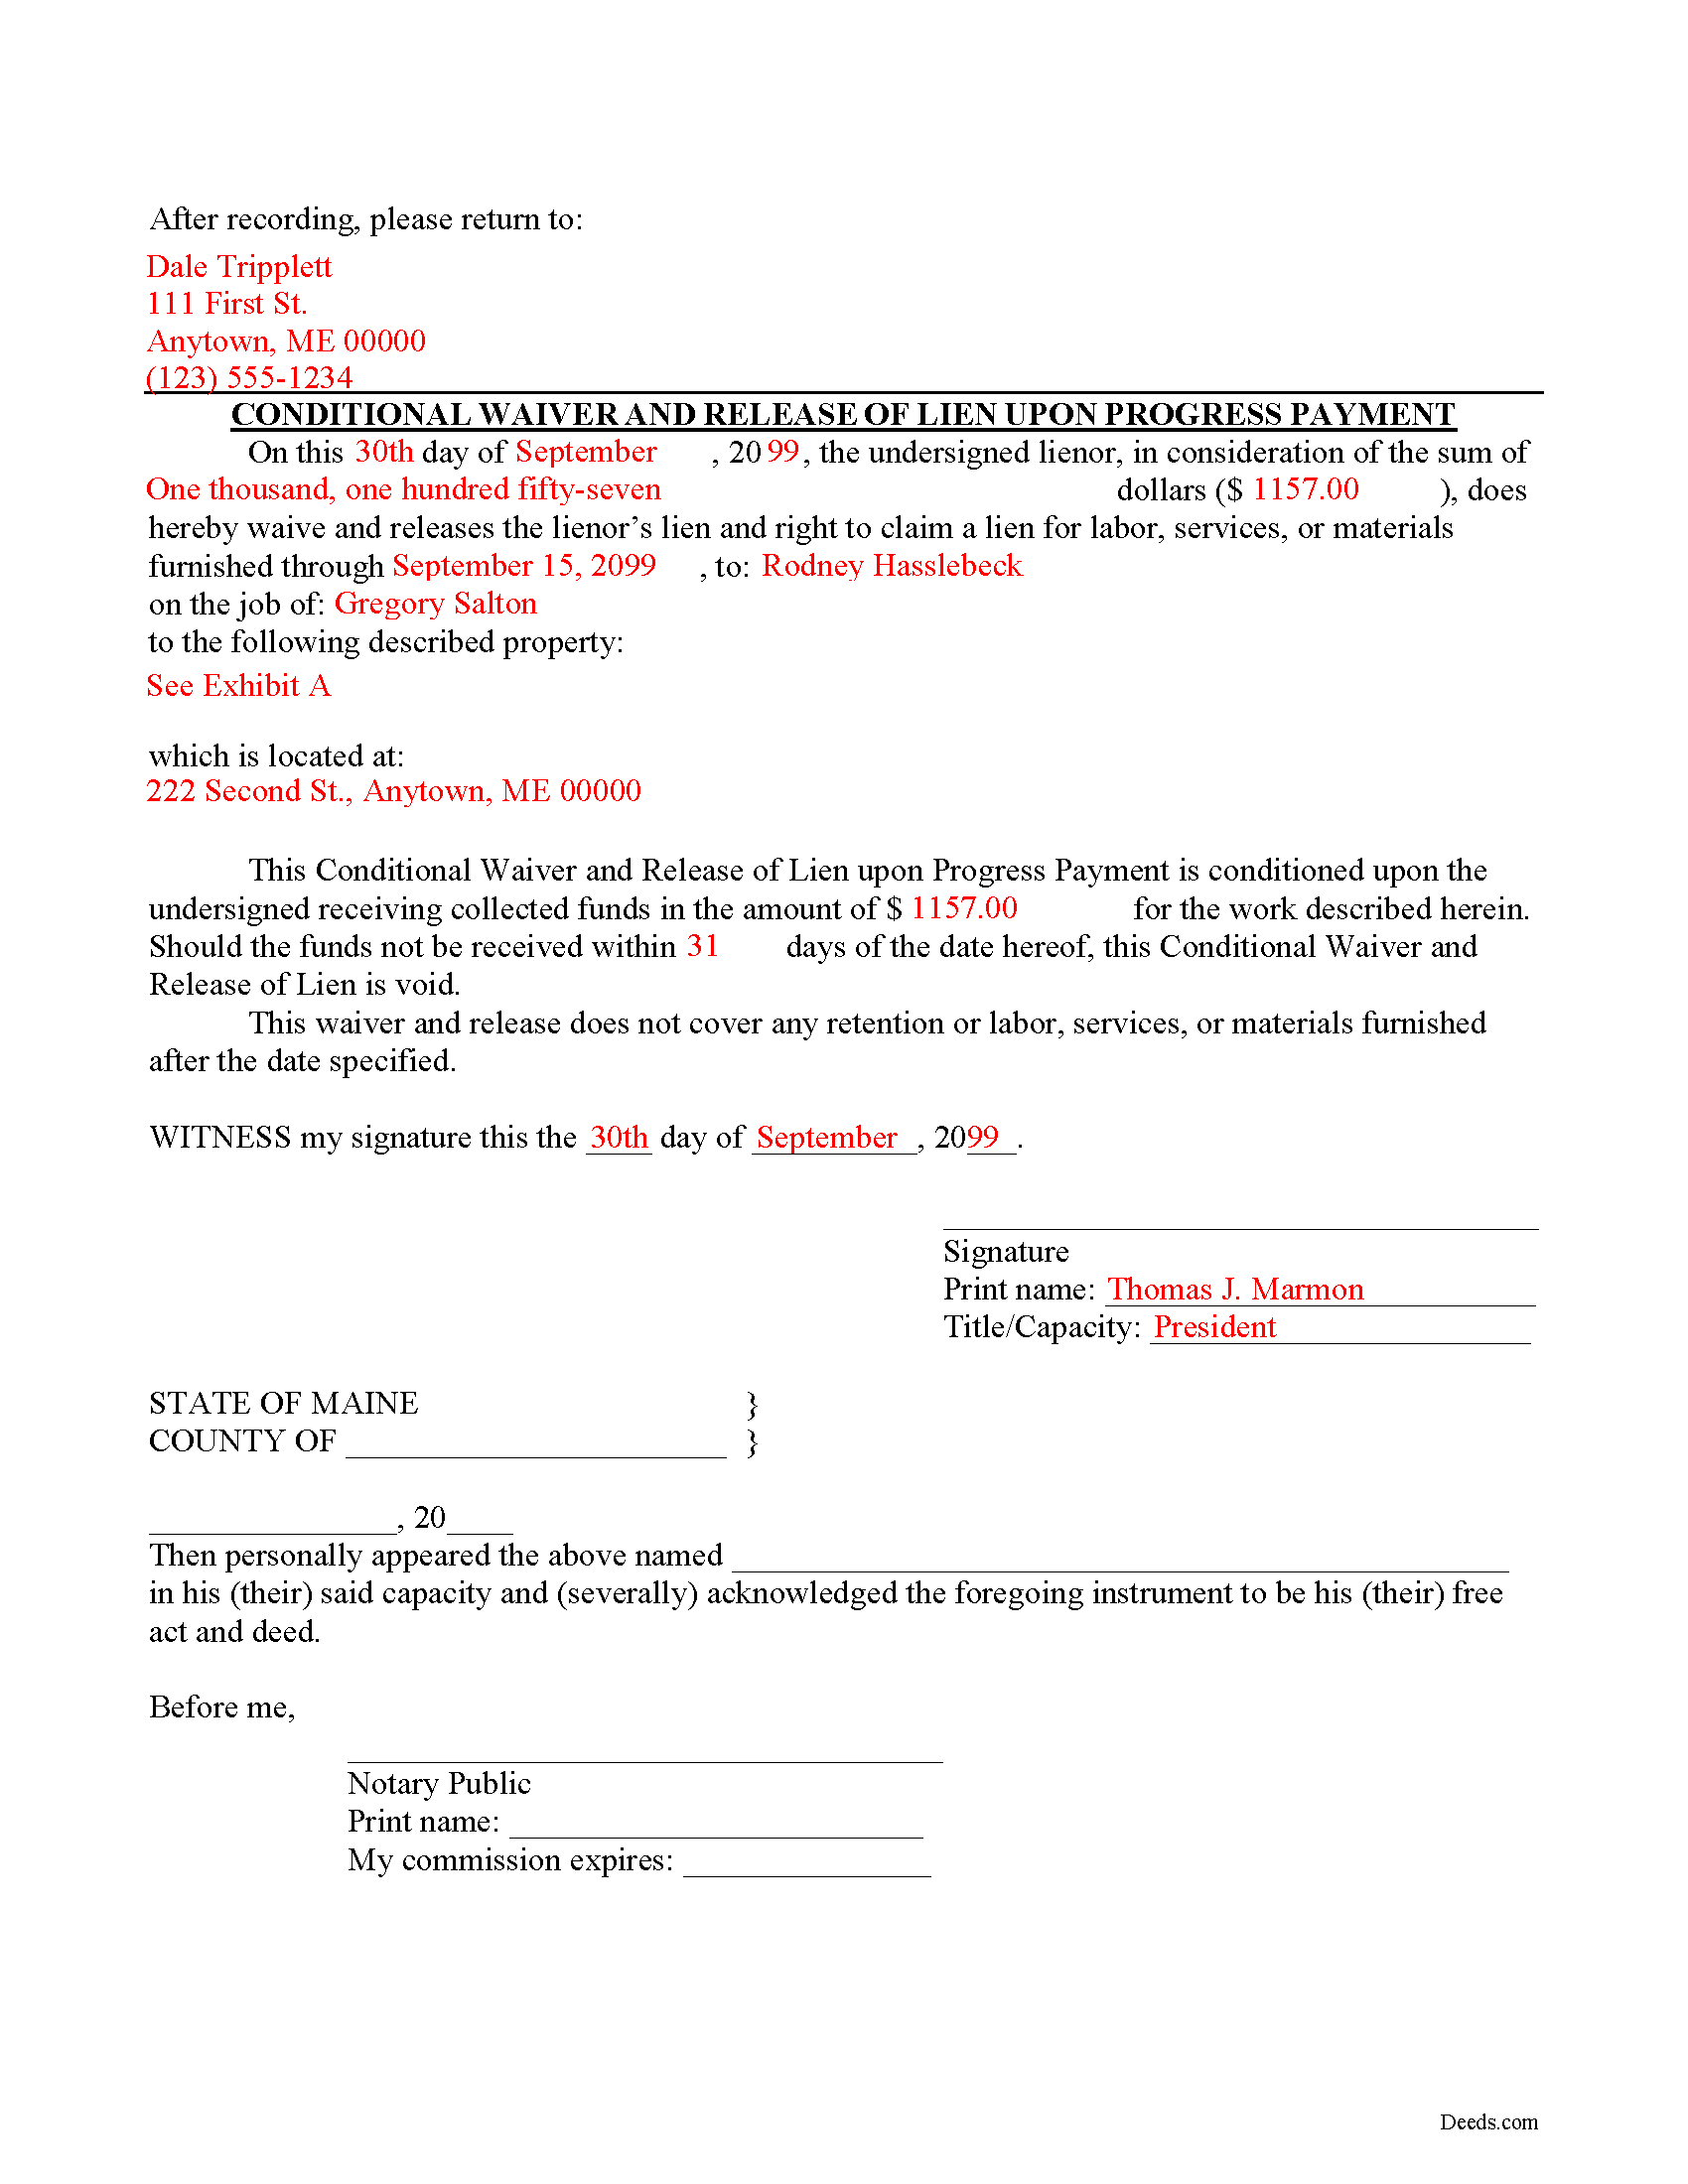 Completed Example of the Conditional Lien Waiver on Progess Payment Document